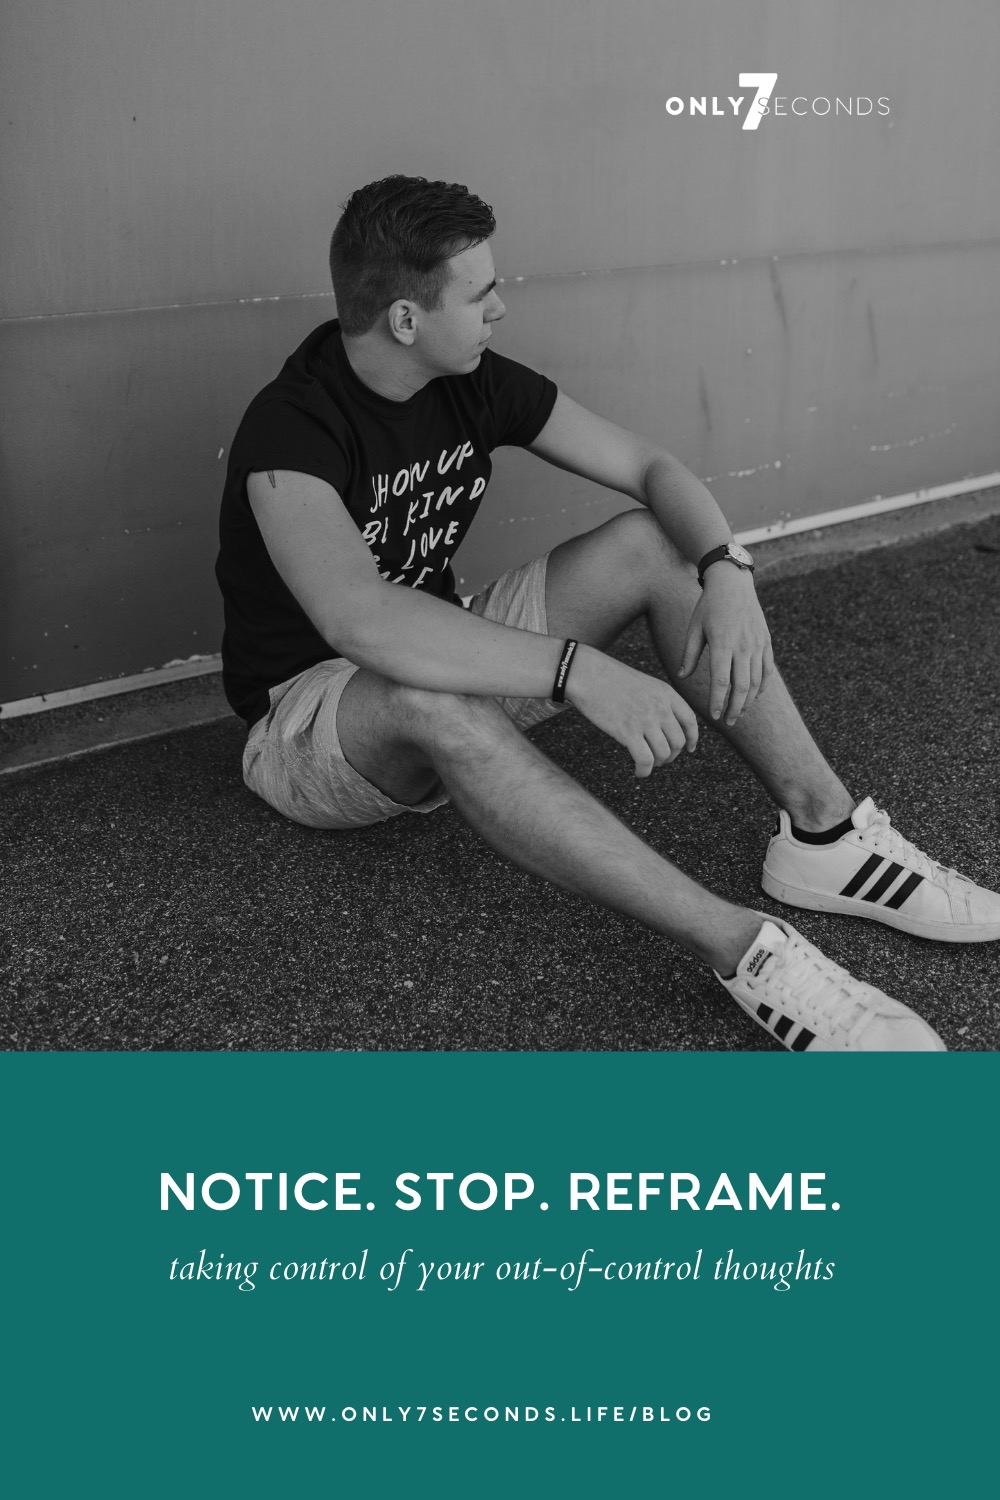 Notice. Stop. Reframe. Taking control of your out-of-control thoughts.